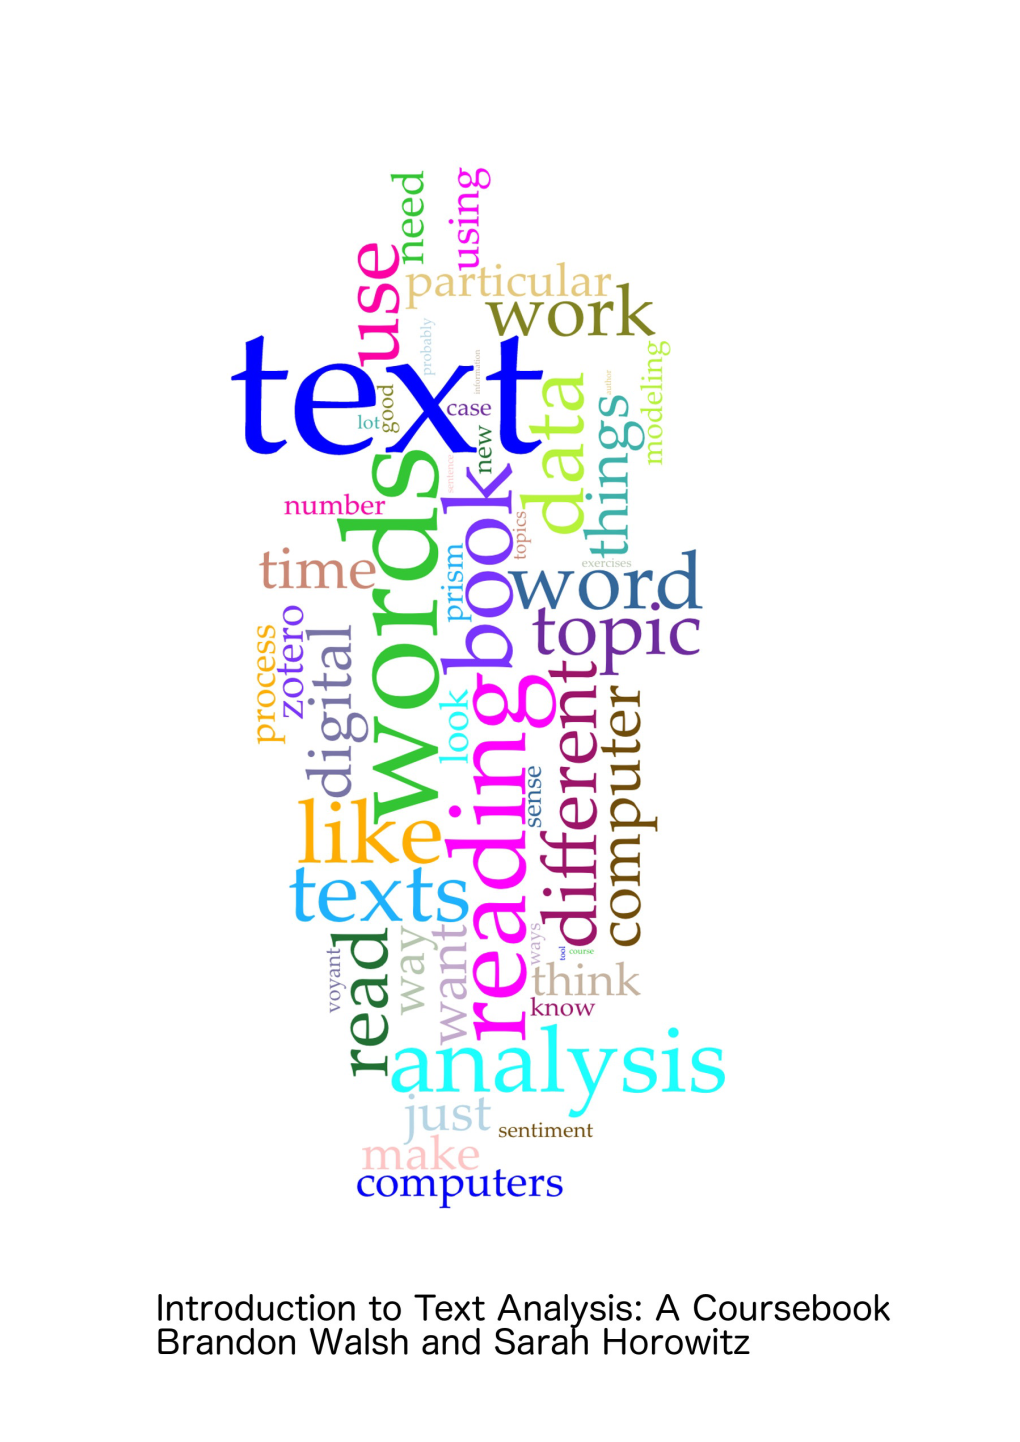 Introduction to Text Analysis: a Coursebook